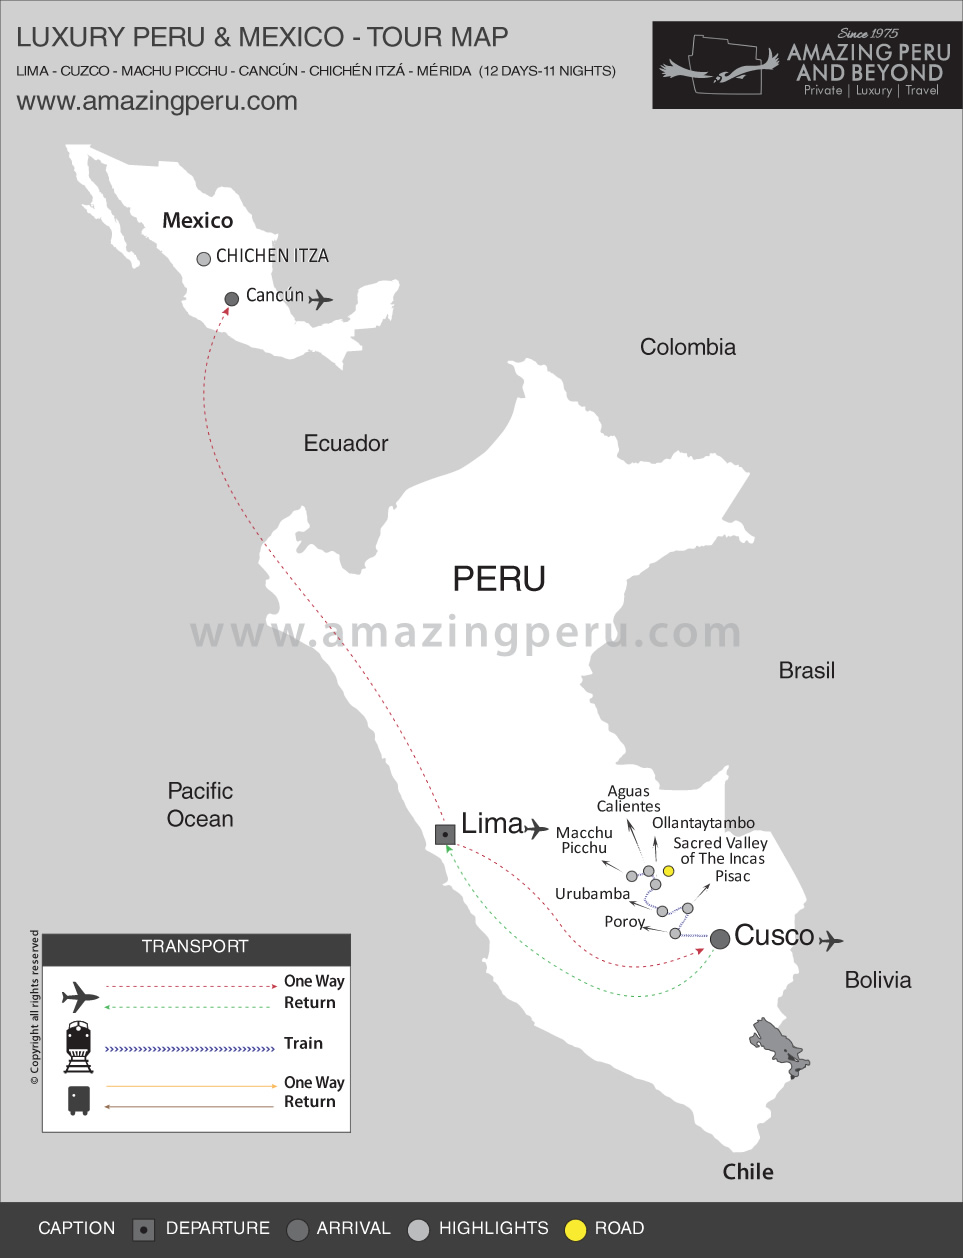 Peru & Mexico Luxury Tour <br />
"The world of the Incas & Mayas" - 12 days / 11 nights.